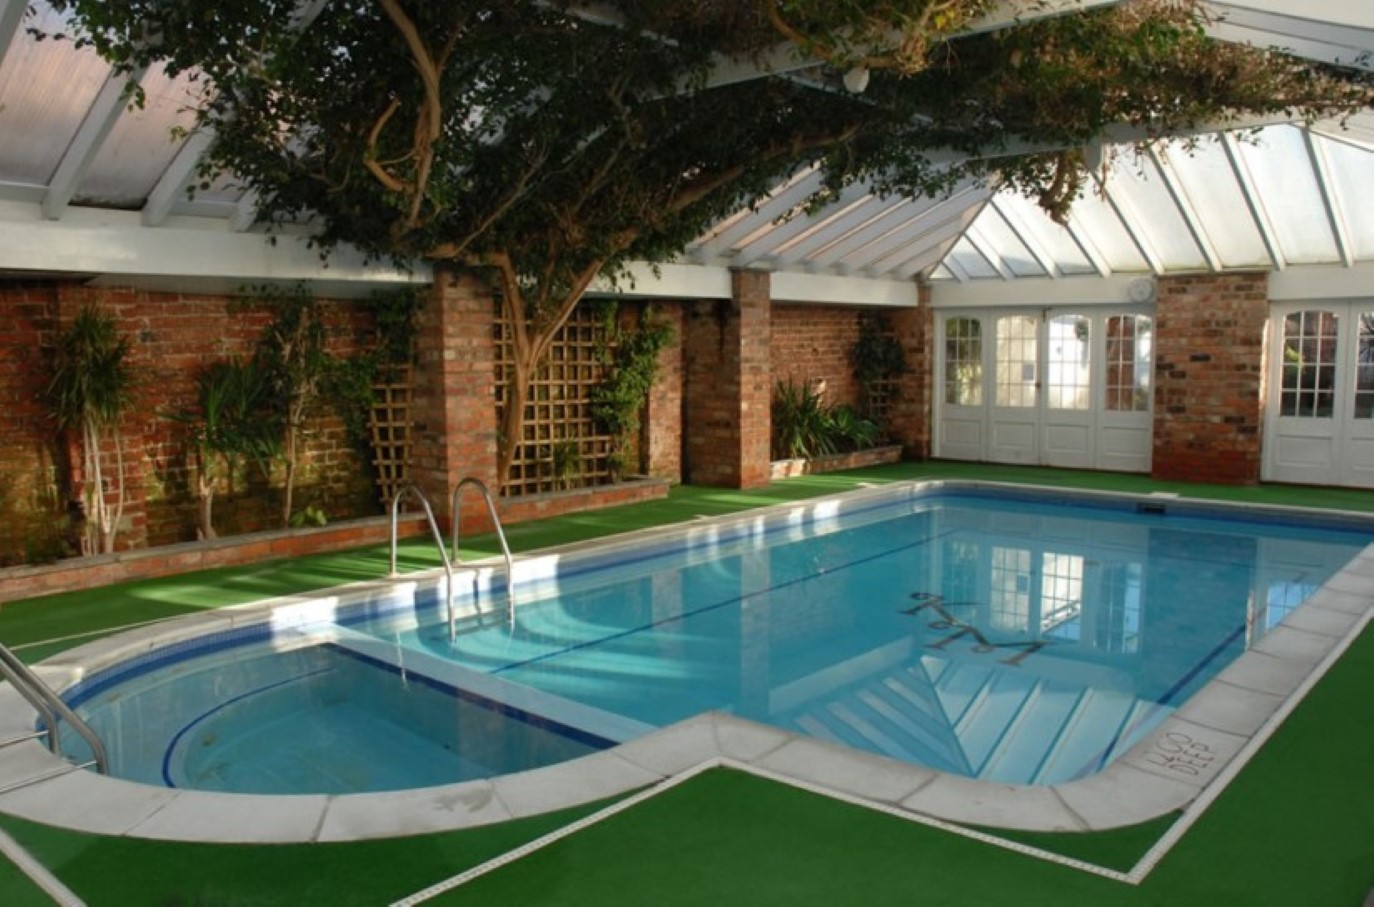 Green Lawn Modern Fake Green Lawn Idea Feat Modern Small Indoor Swimming Pool With Glass Ceiling And Brick Wall Design Pool  Making Small Swimming Pool In Best House 